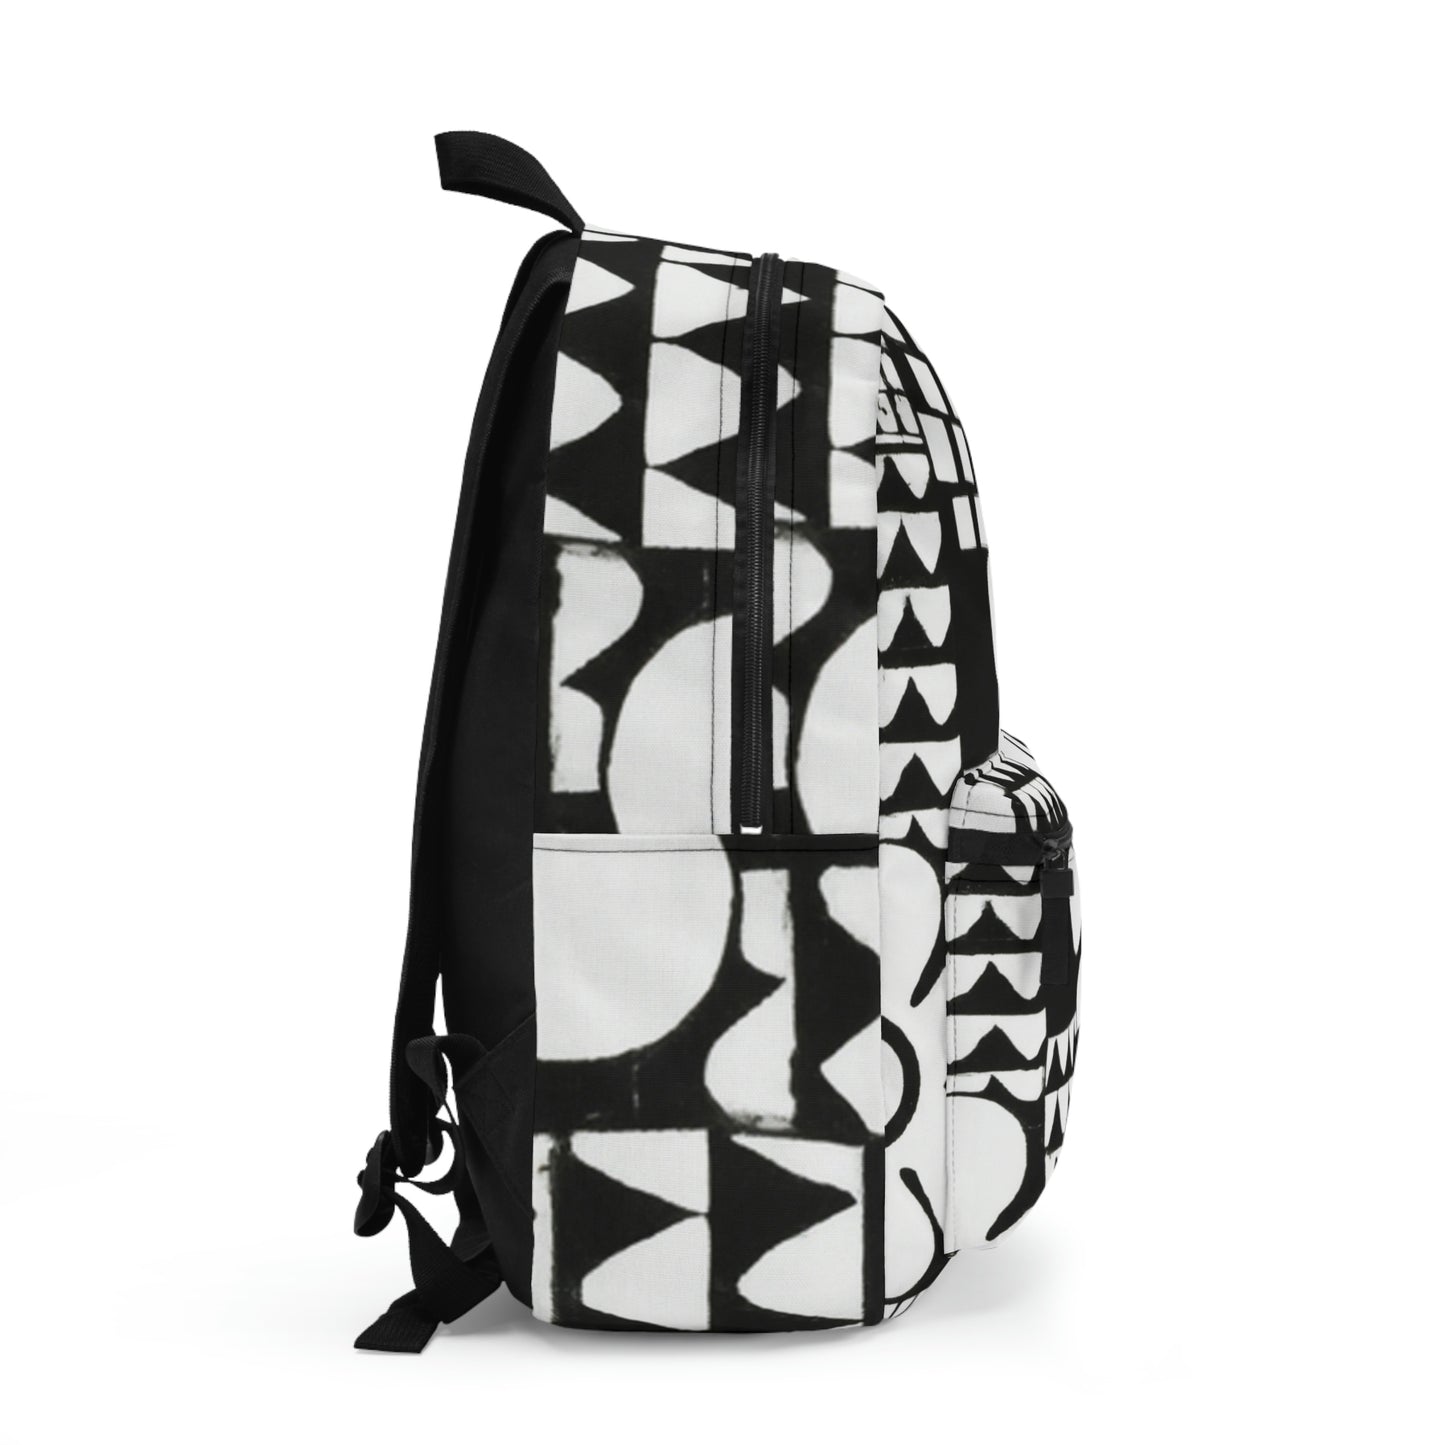 Clio Monet Backpack